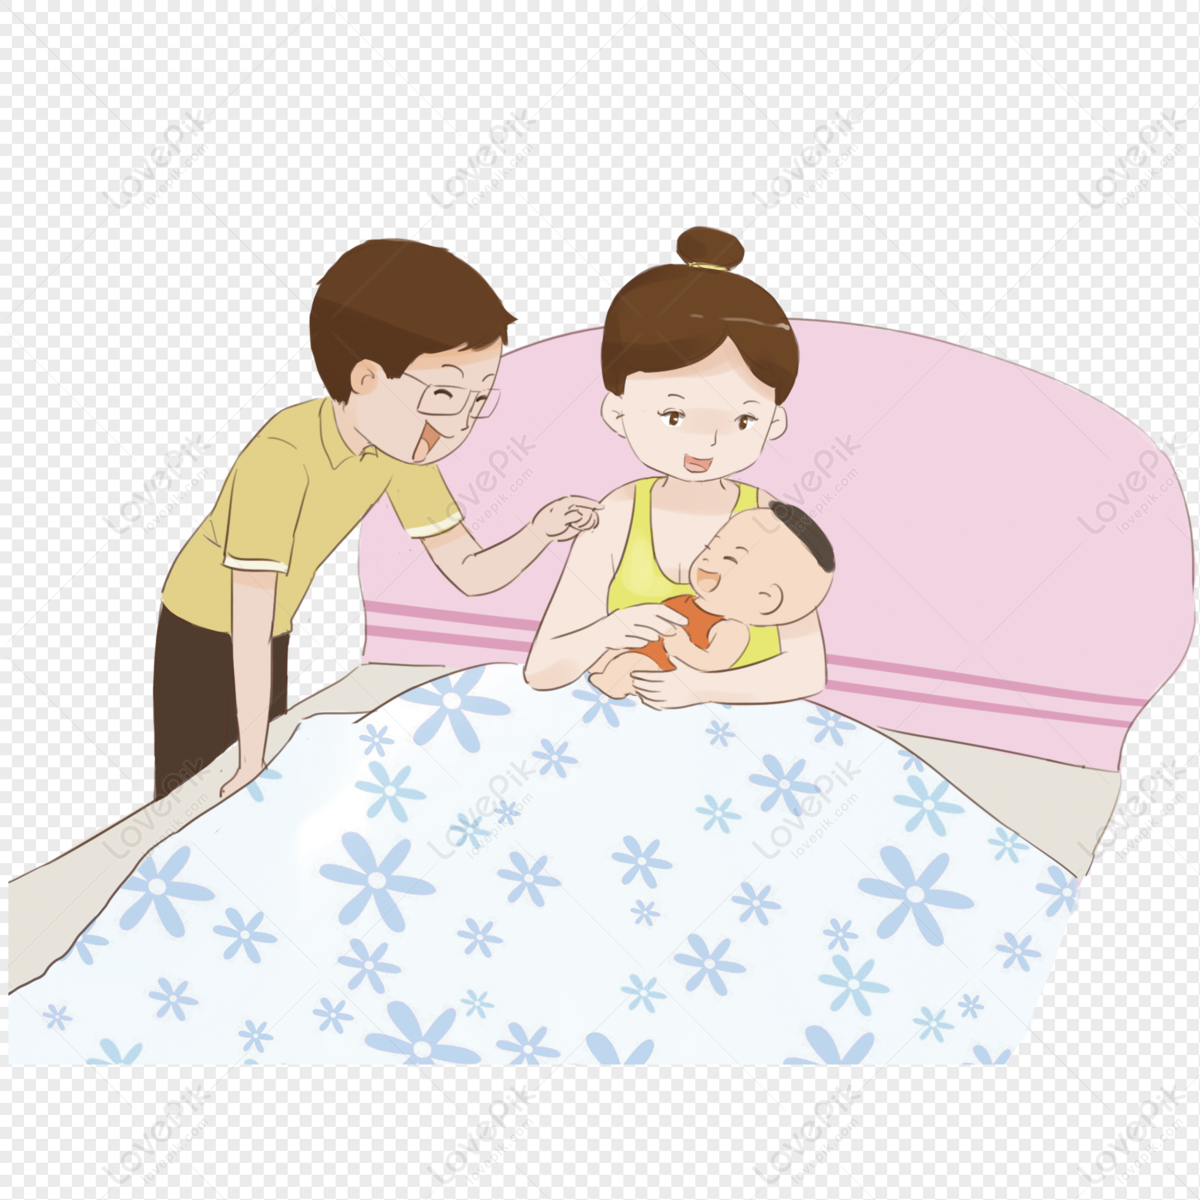 Parents And Babies PNG Transparent Image And Clipart Image For Free  Download - Lovepik | 401243347